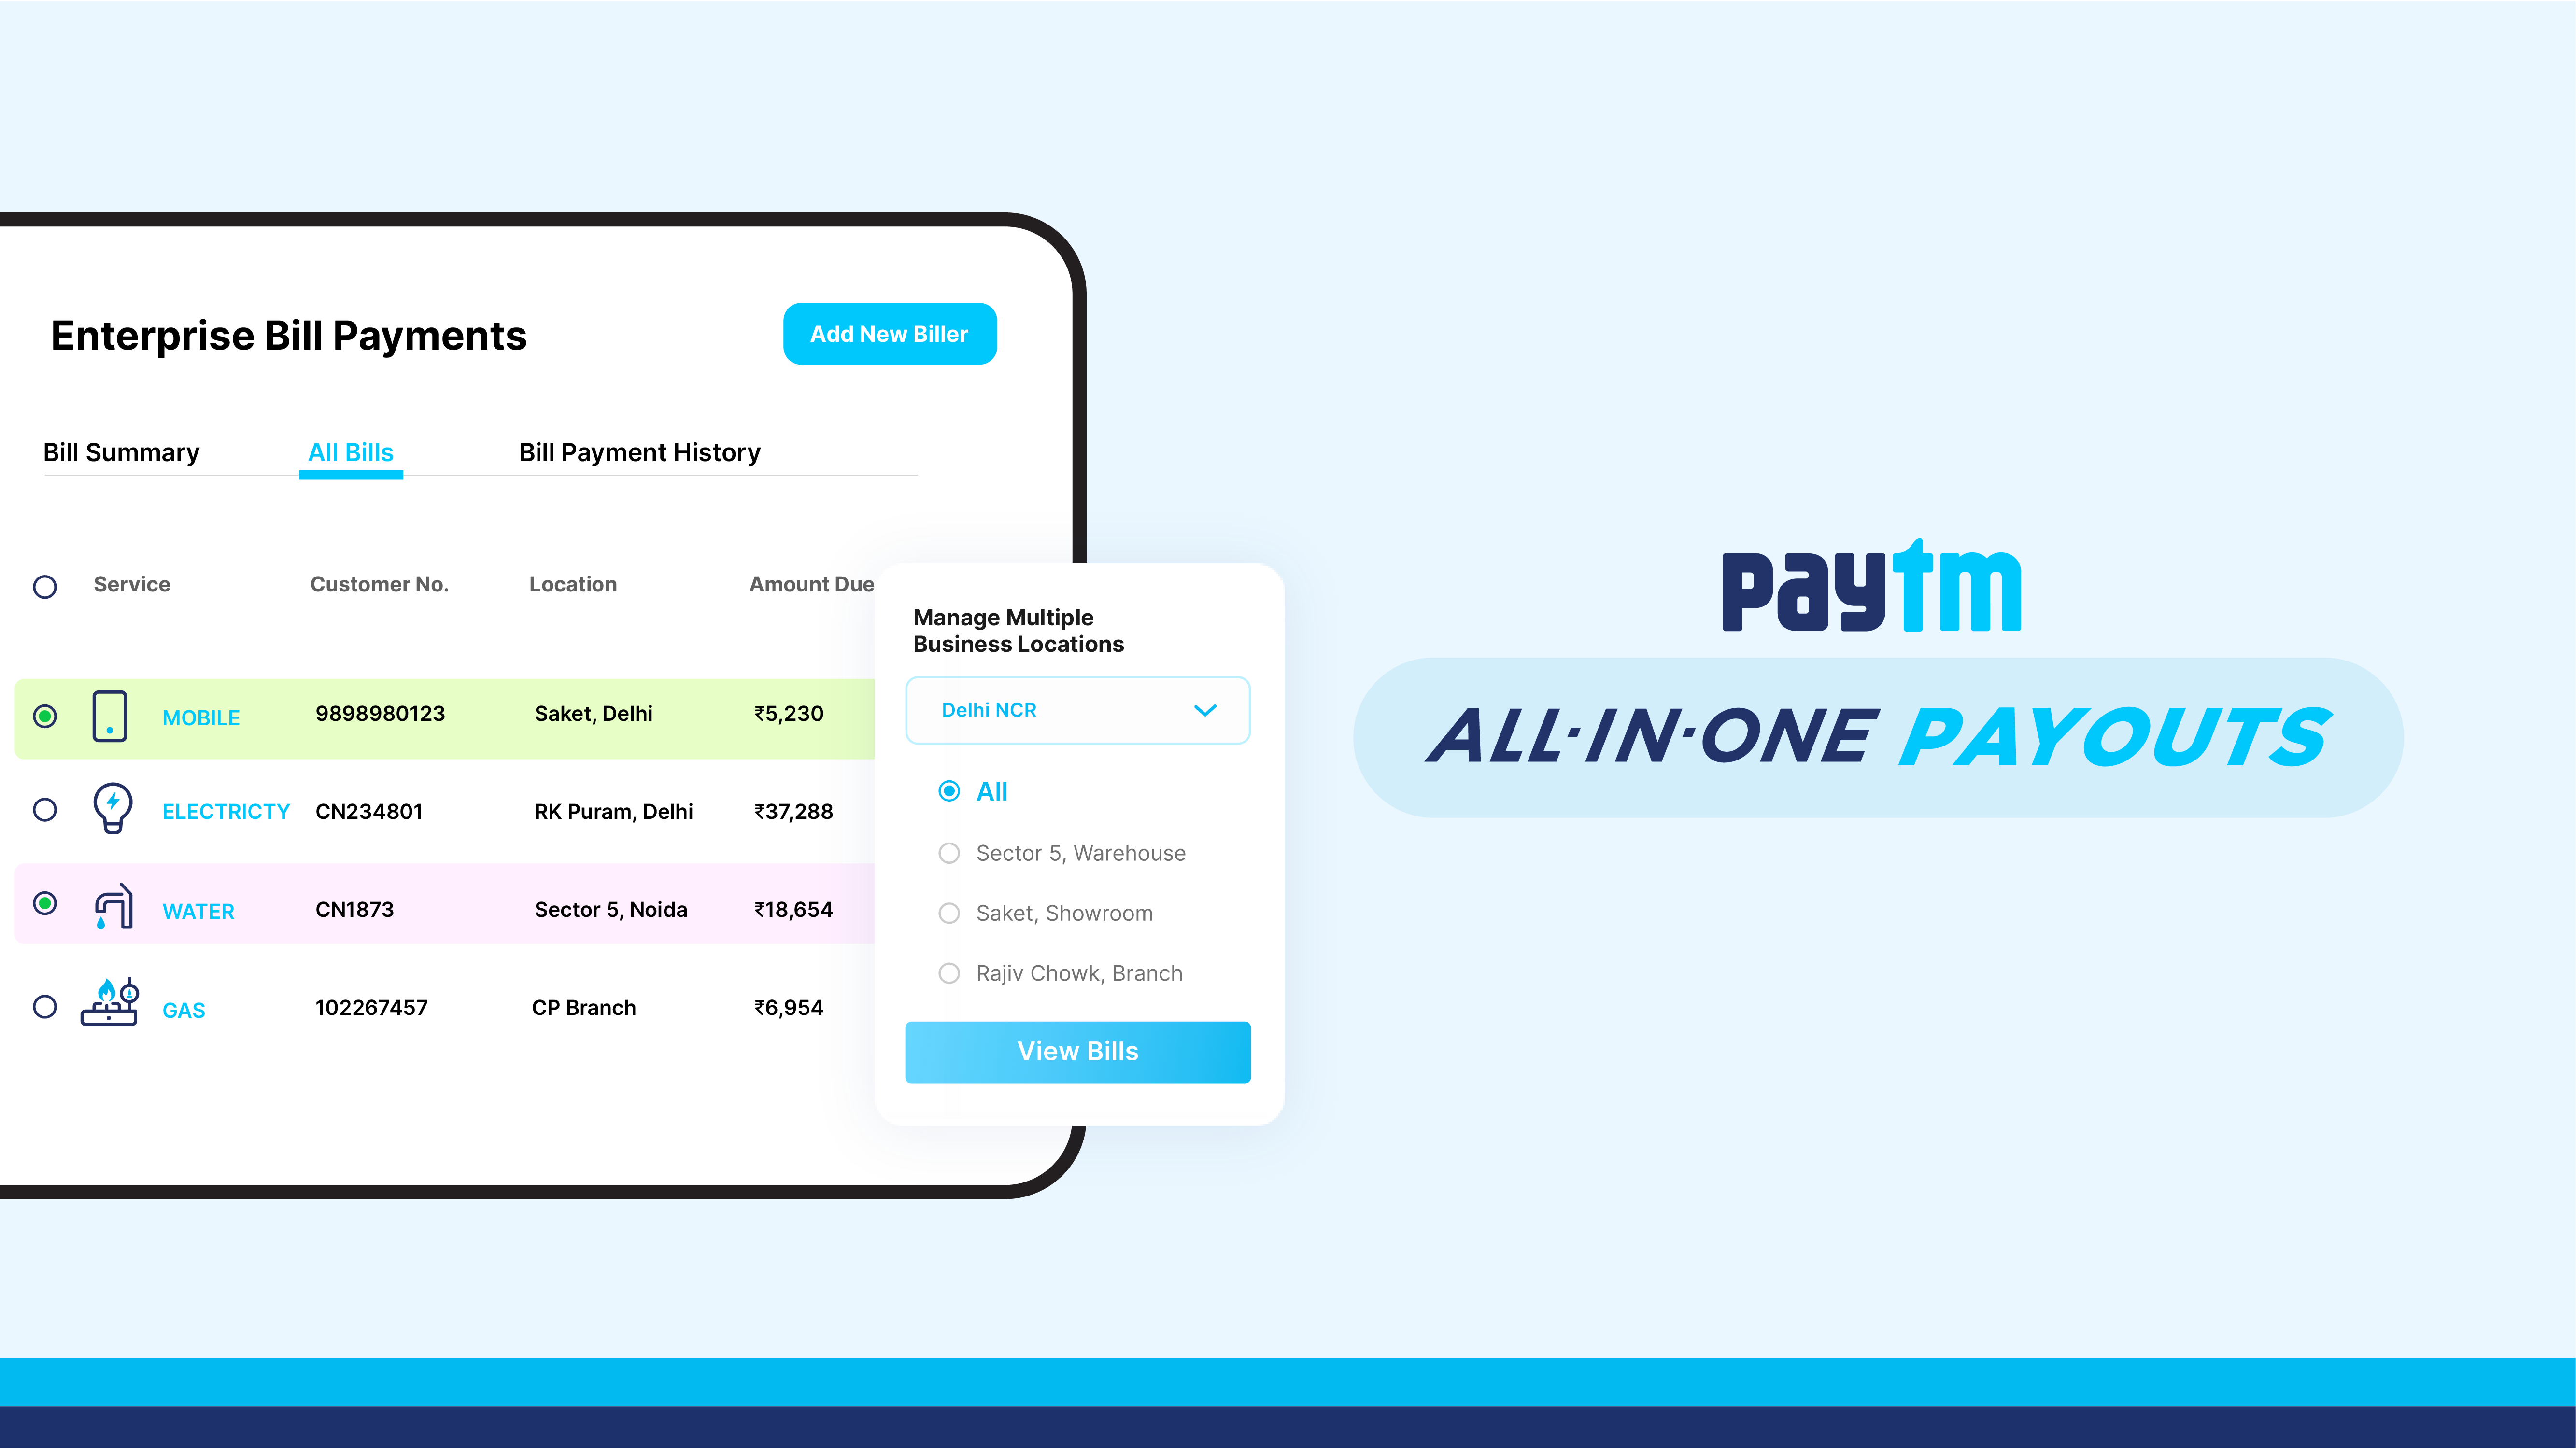 Paytm Payouts’ Enterprise Bill Payment System aims at Rs. 3,000 crores decoding=